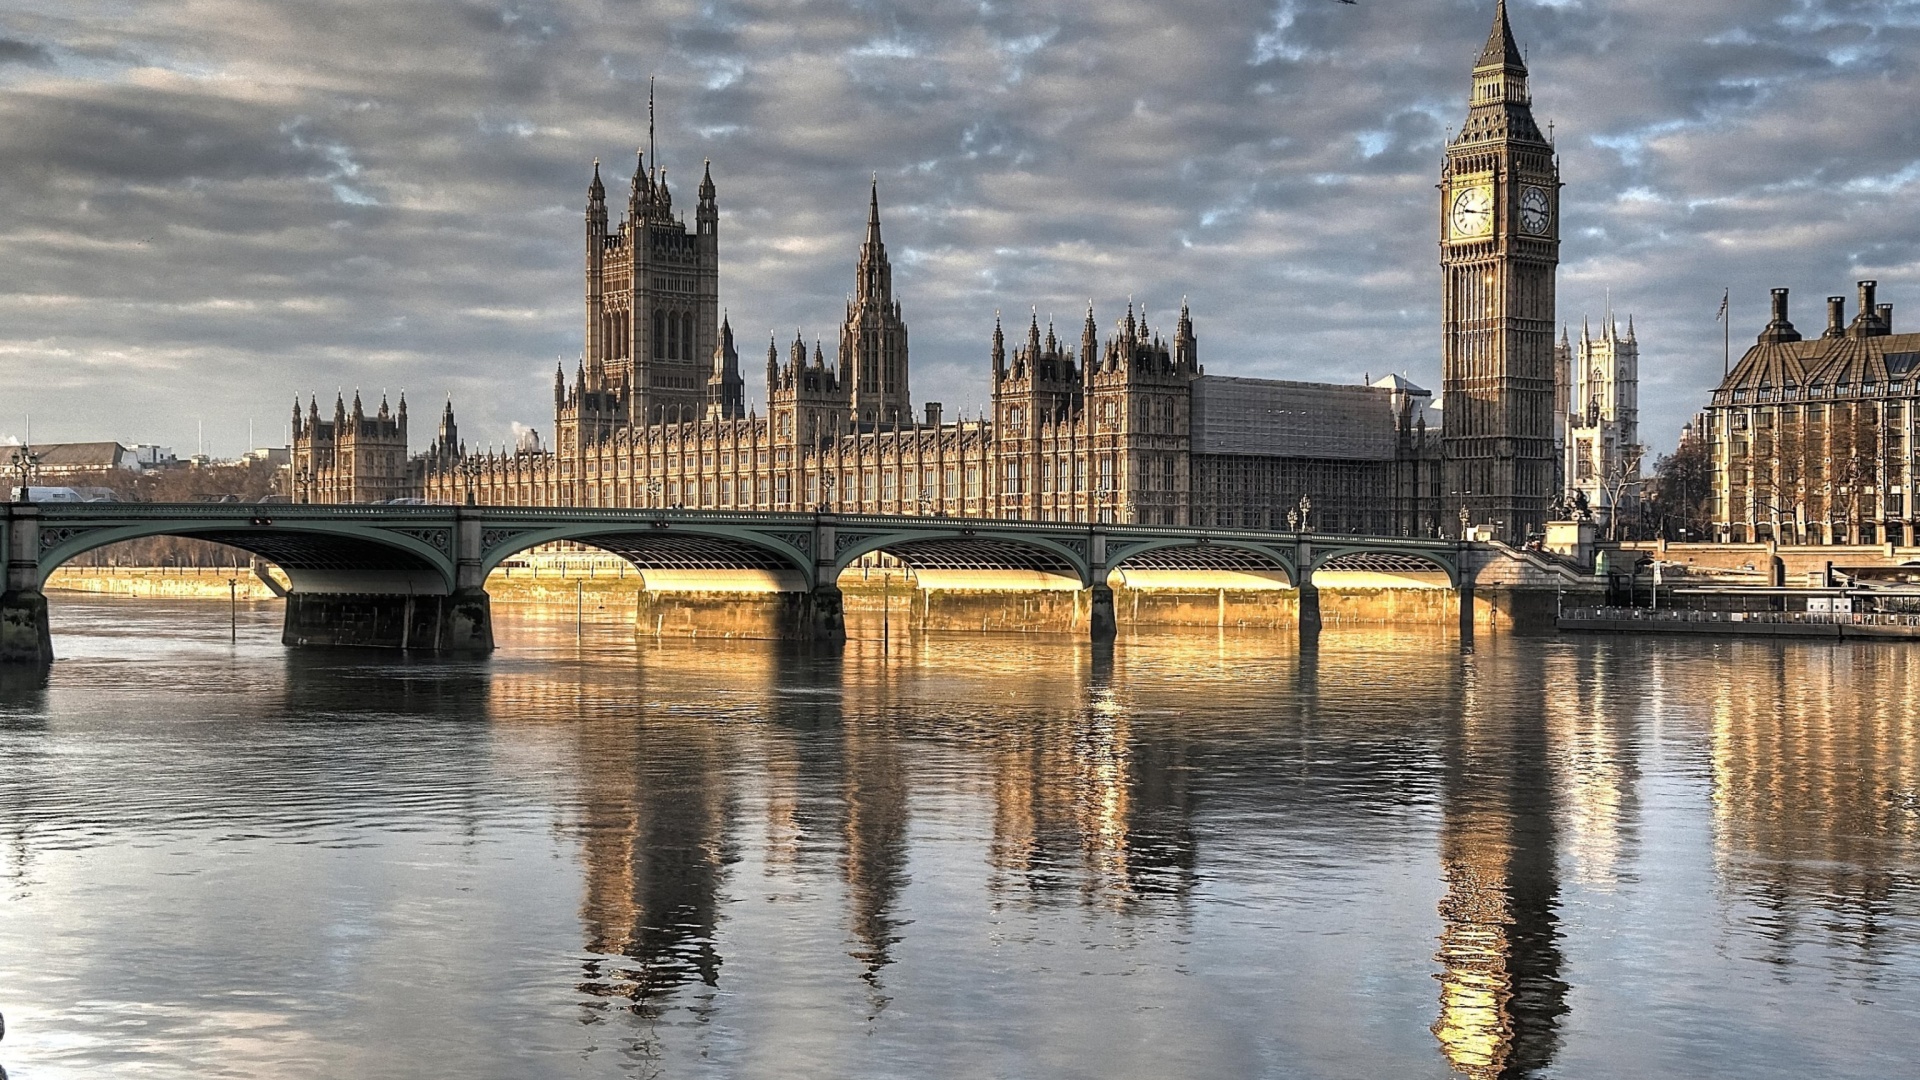 Das Palace of Westminster in London Wallpaper 1920x1080